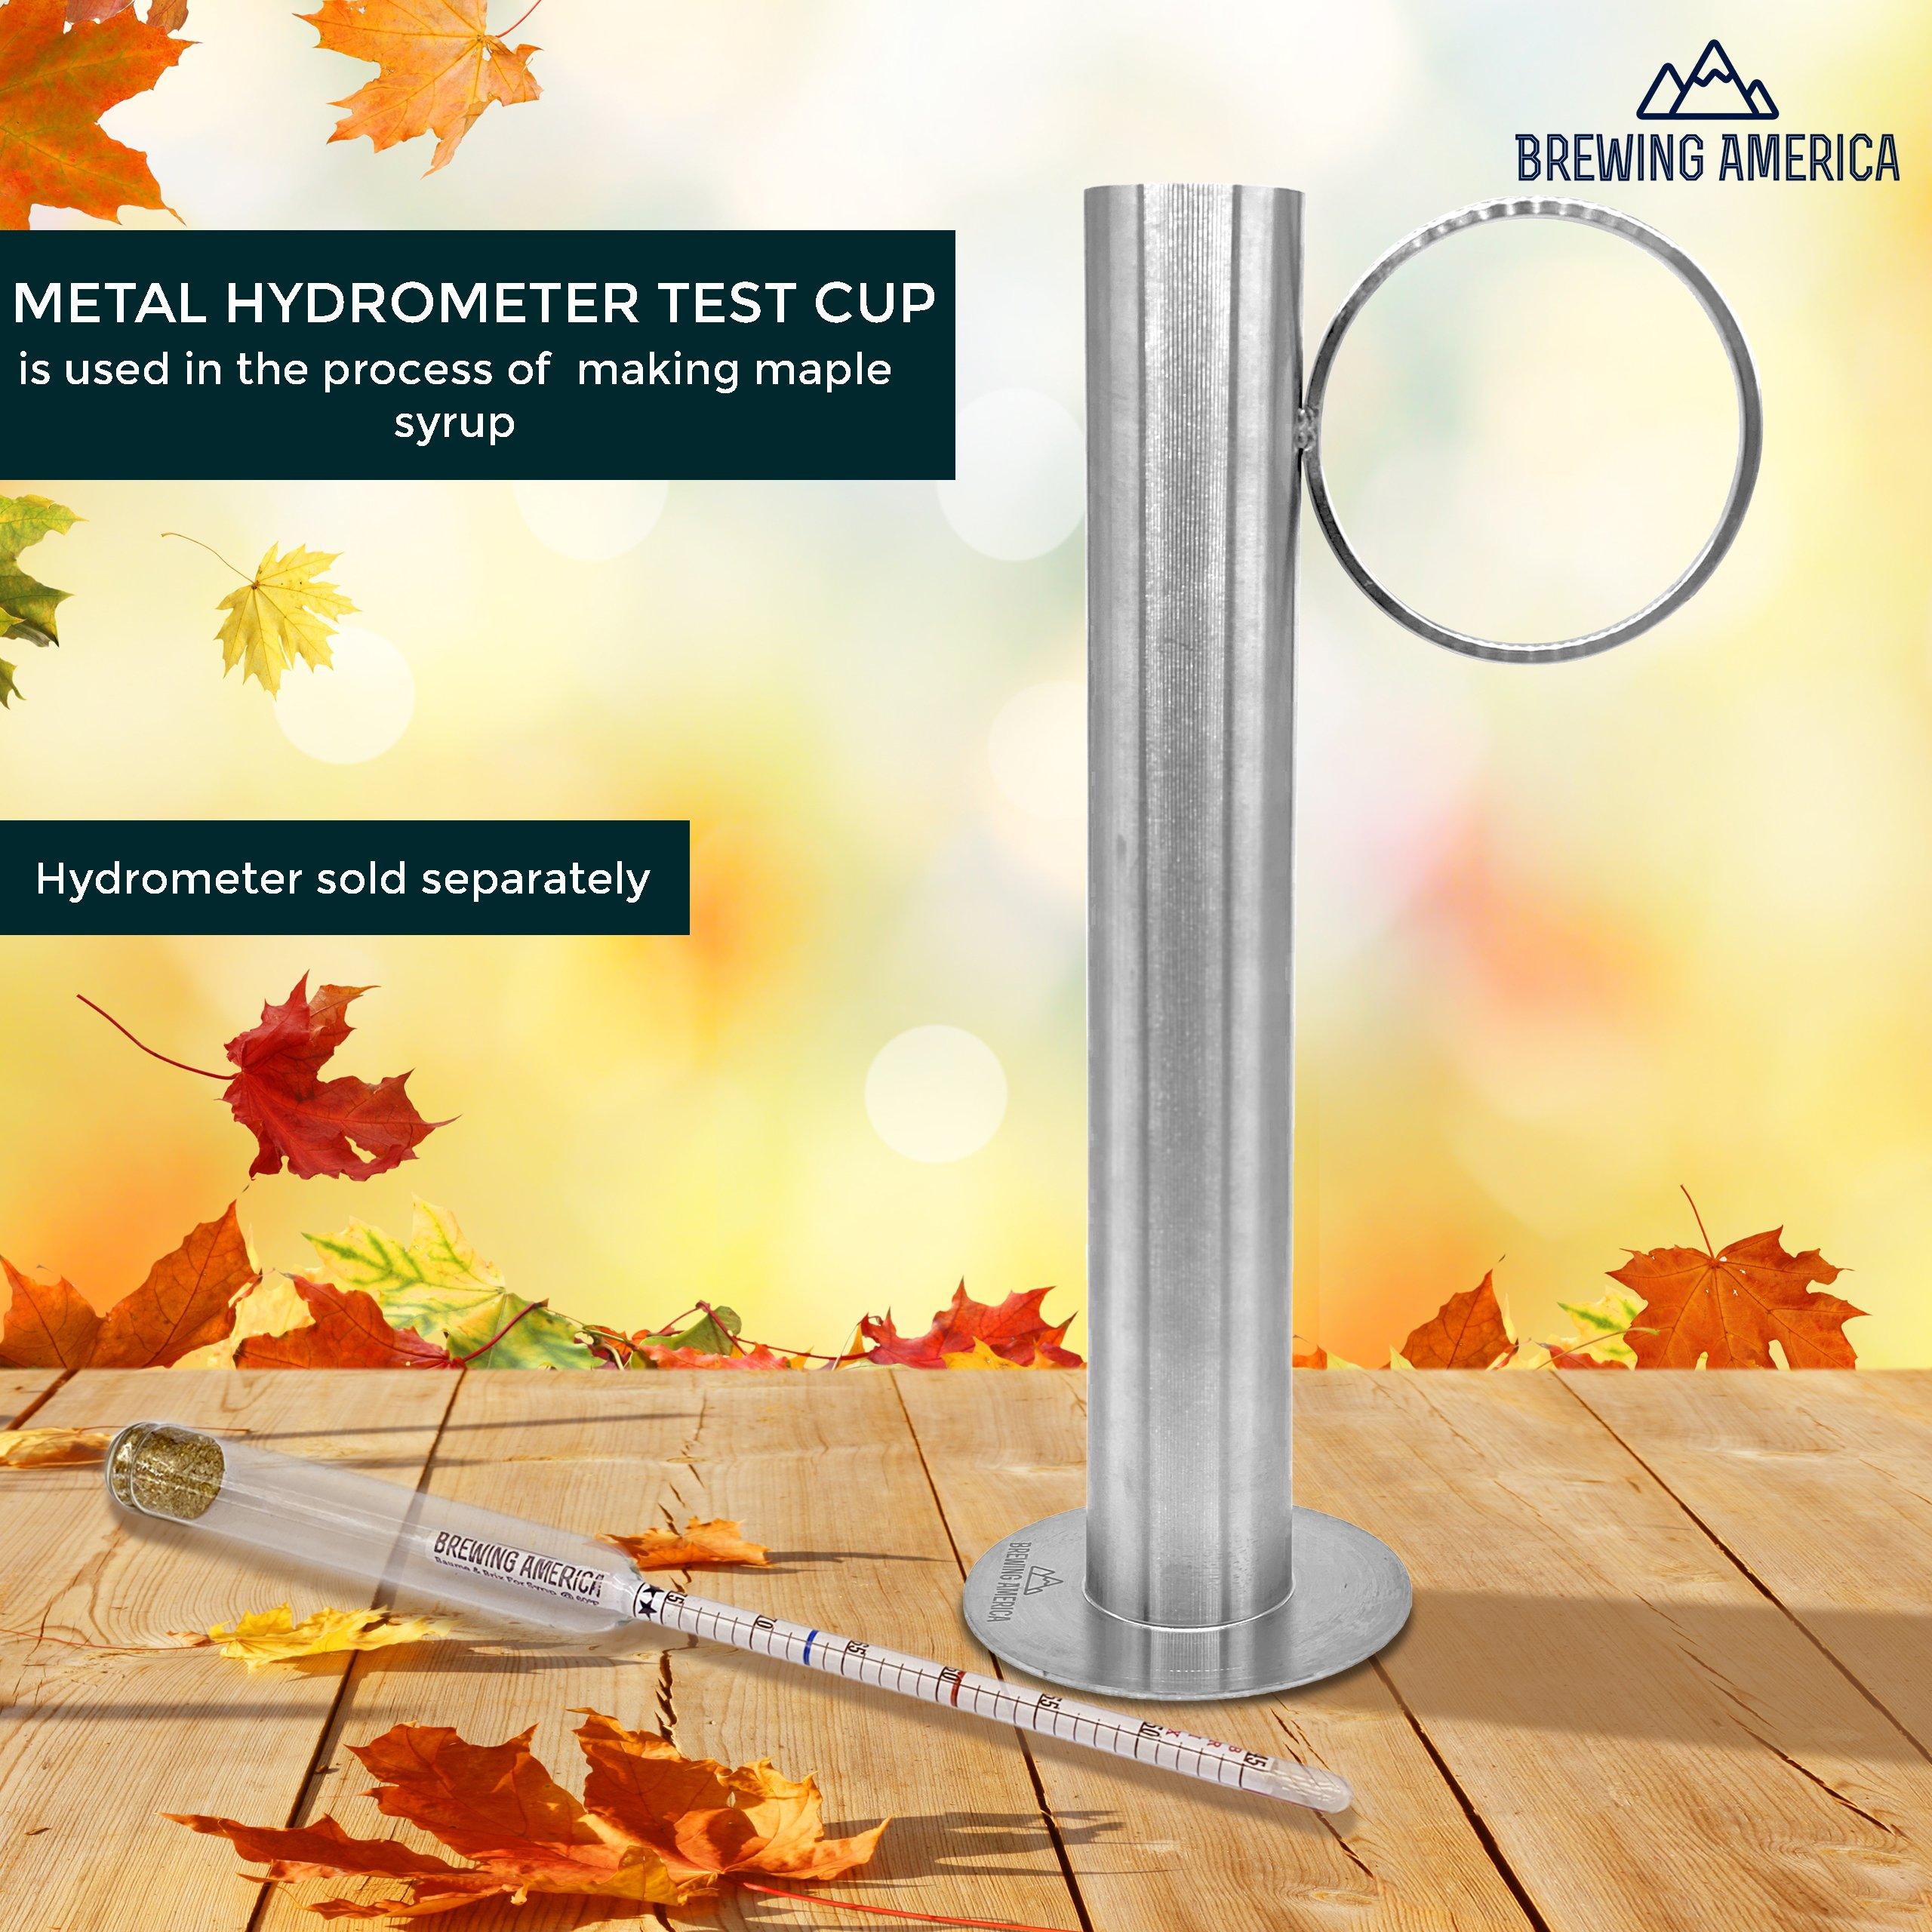 Maple Syrup Hydrometer Test Cup for Sugar and Moisture Content Measurement for Consistently Delicious Pure Syrup - Stainless Steel - 10 Inches Tall Brewing America 